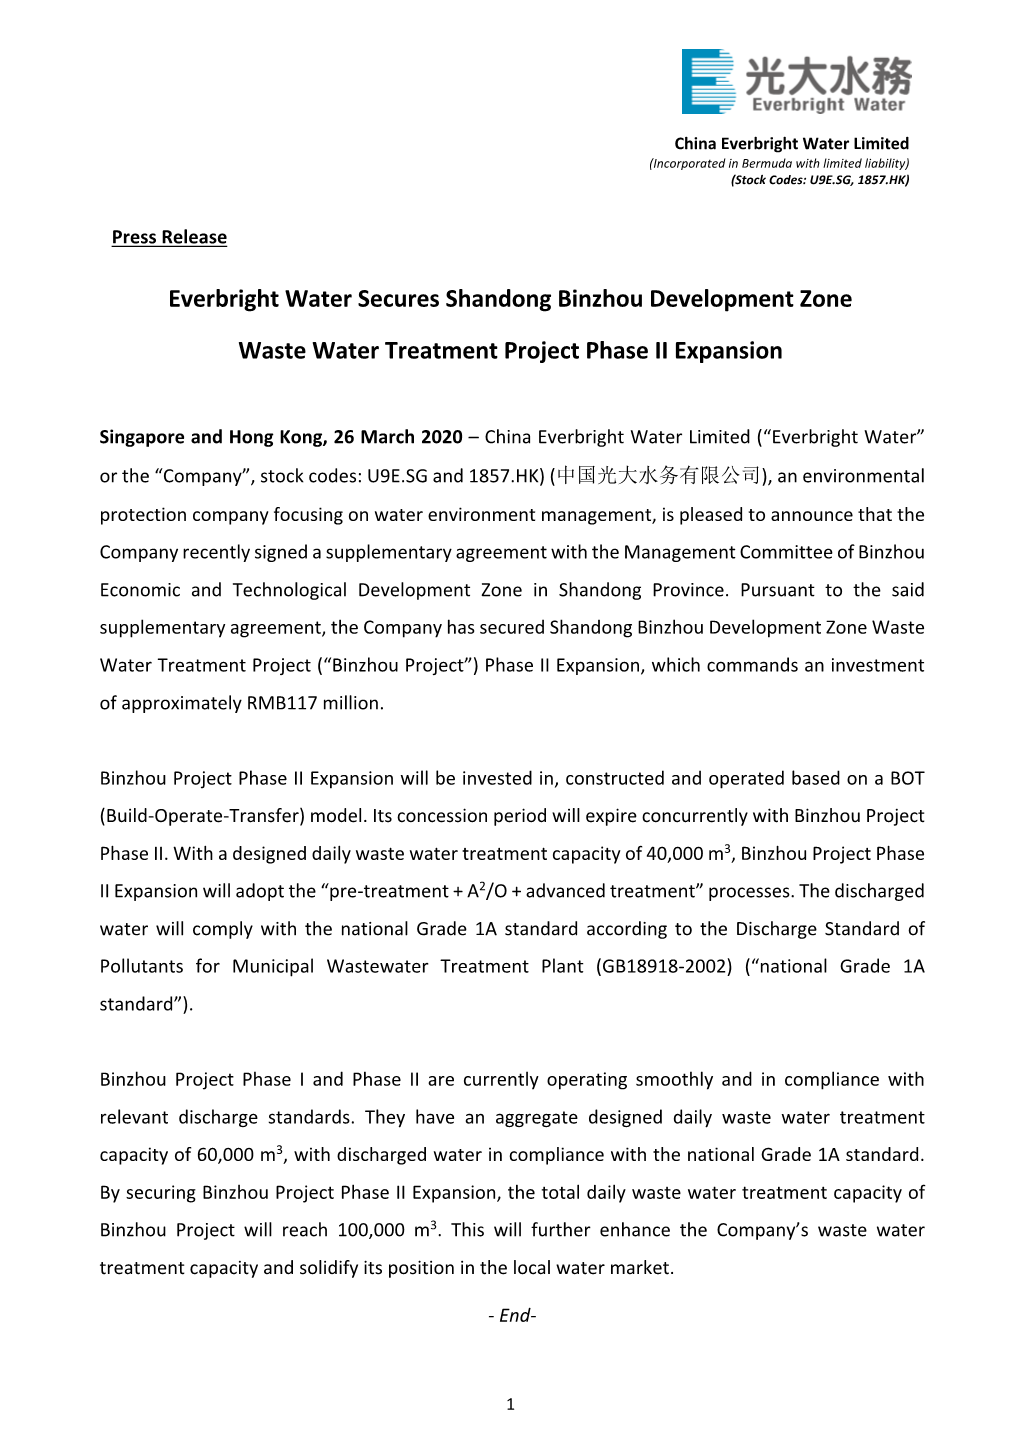 Everbright Water Secures Shandong Binzhou Development Zone Waste Water Treatment Project Phase II Expansion